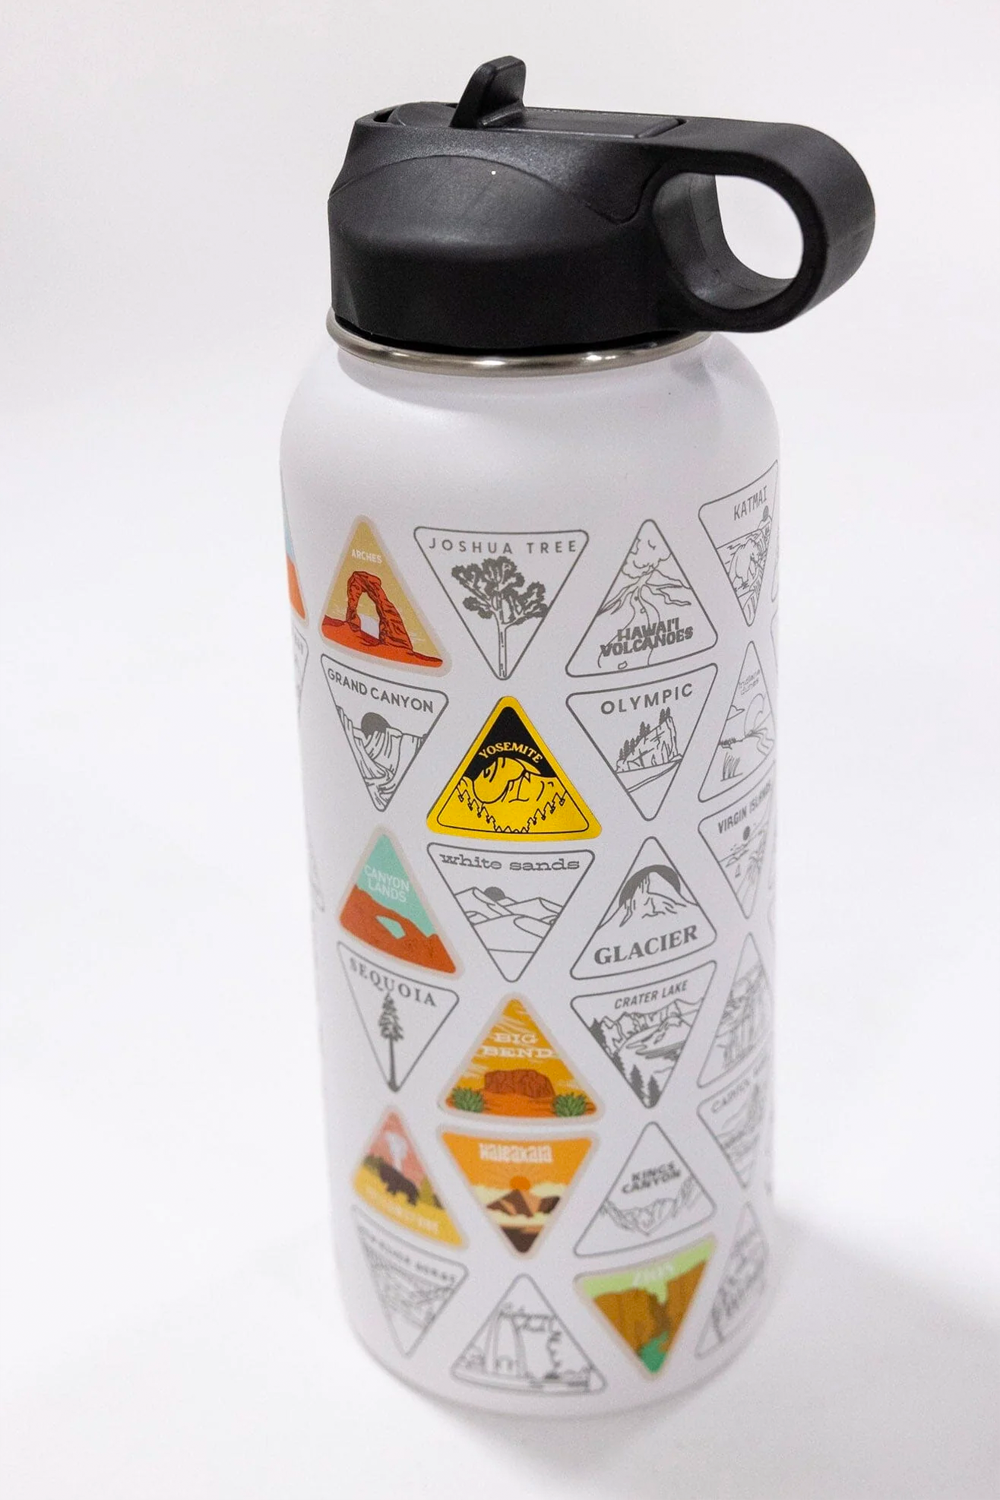 #national park_none _USA National Parks collectible souvenir travel camping water bottle